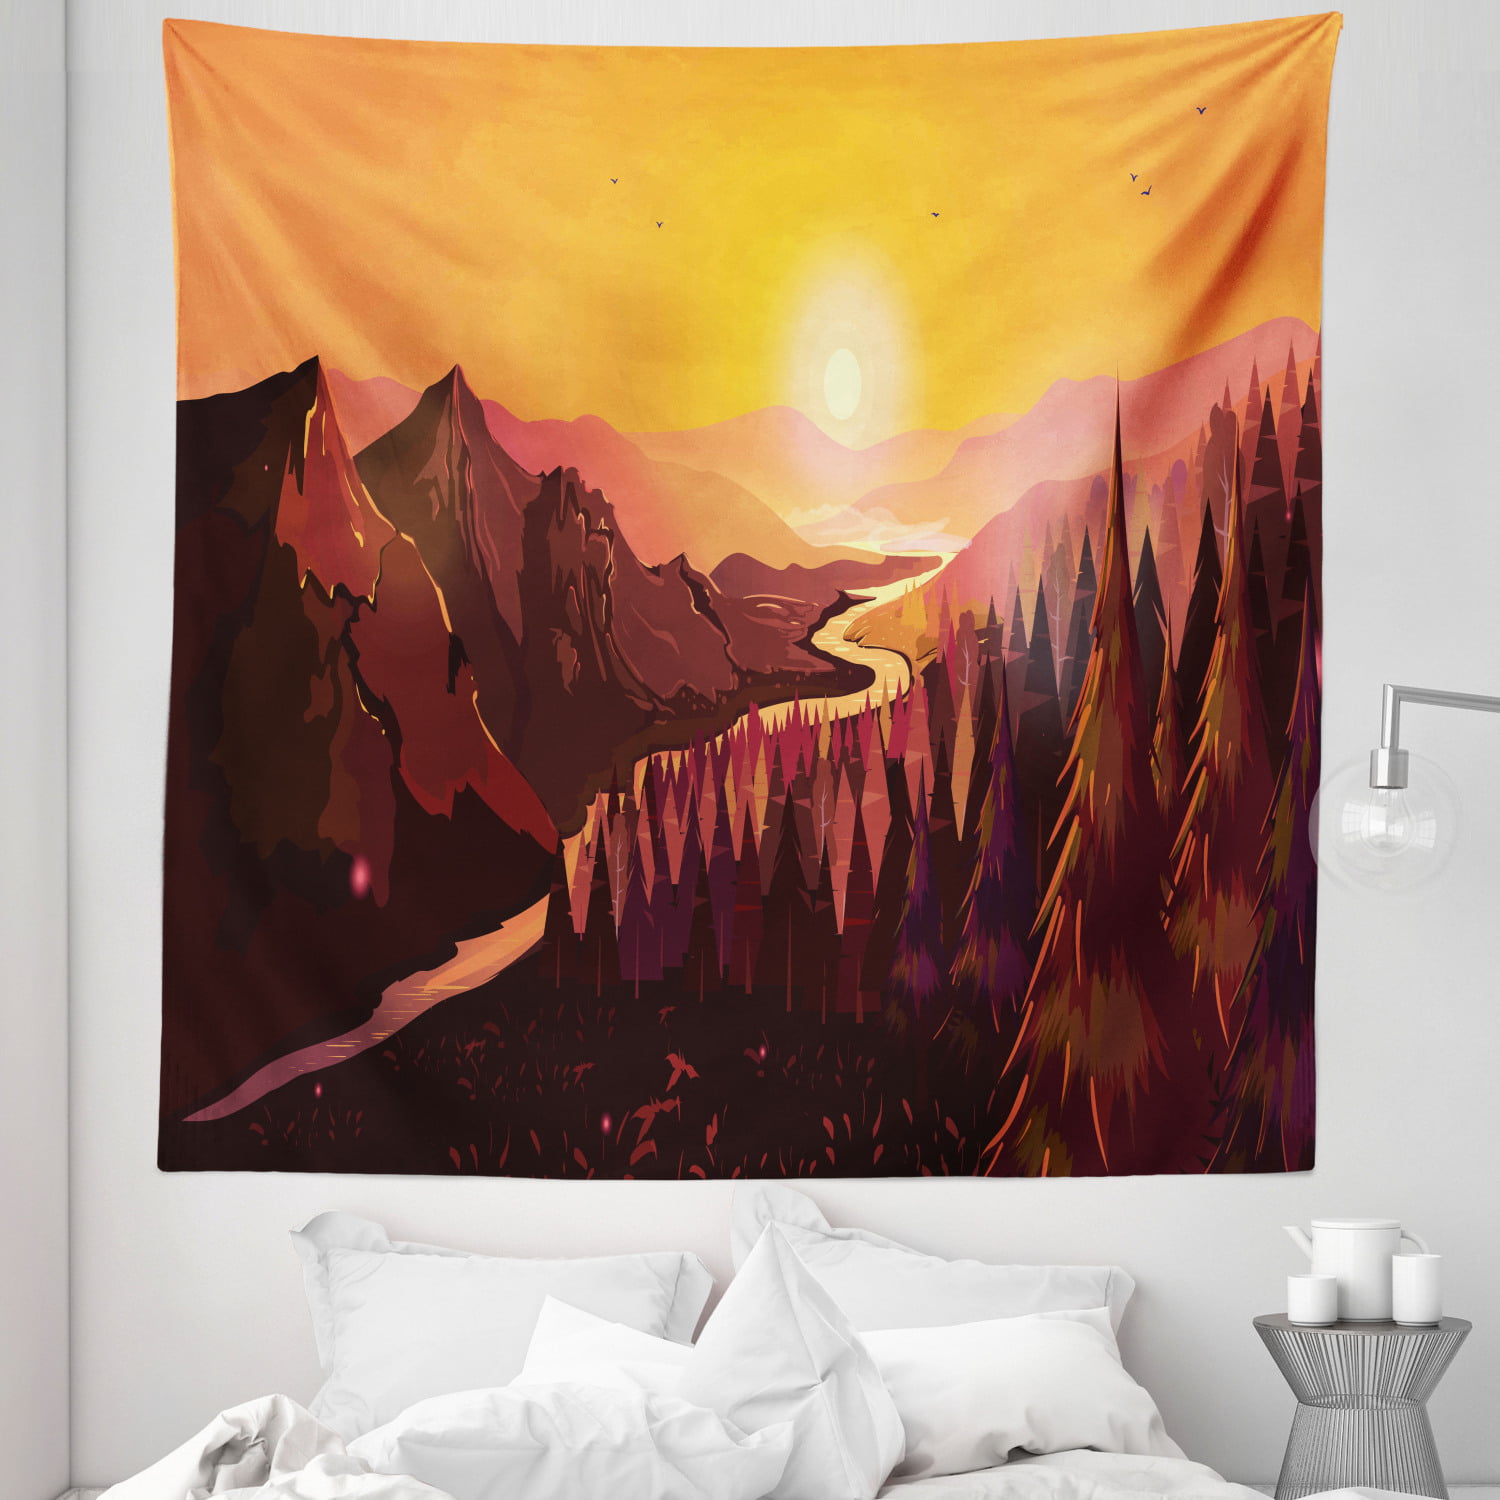 Hazy Sky Sun Tapestry Abstract Mountain Tapestry Pink Land Tapestry Wall Hanging River Tapestry For Bedroom Living Room Dorm Home Deco